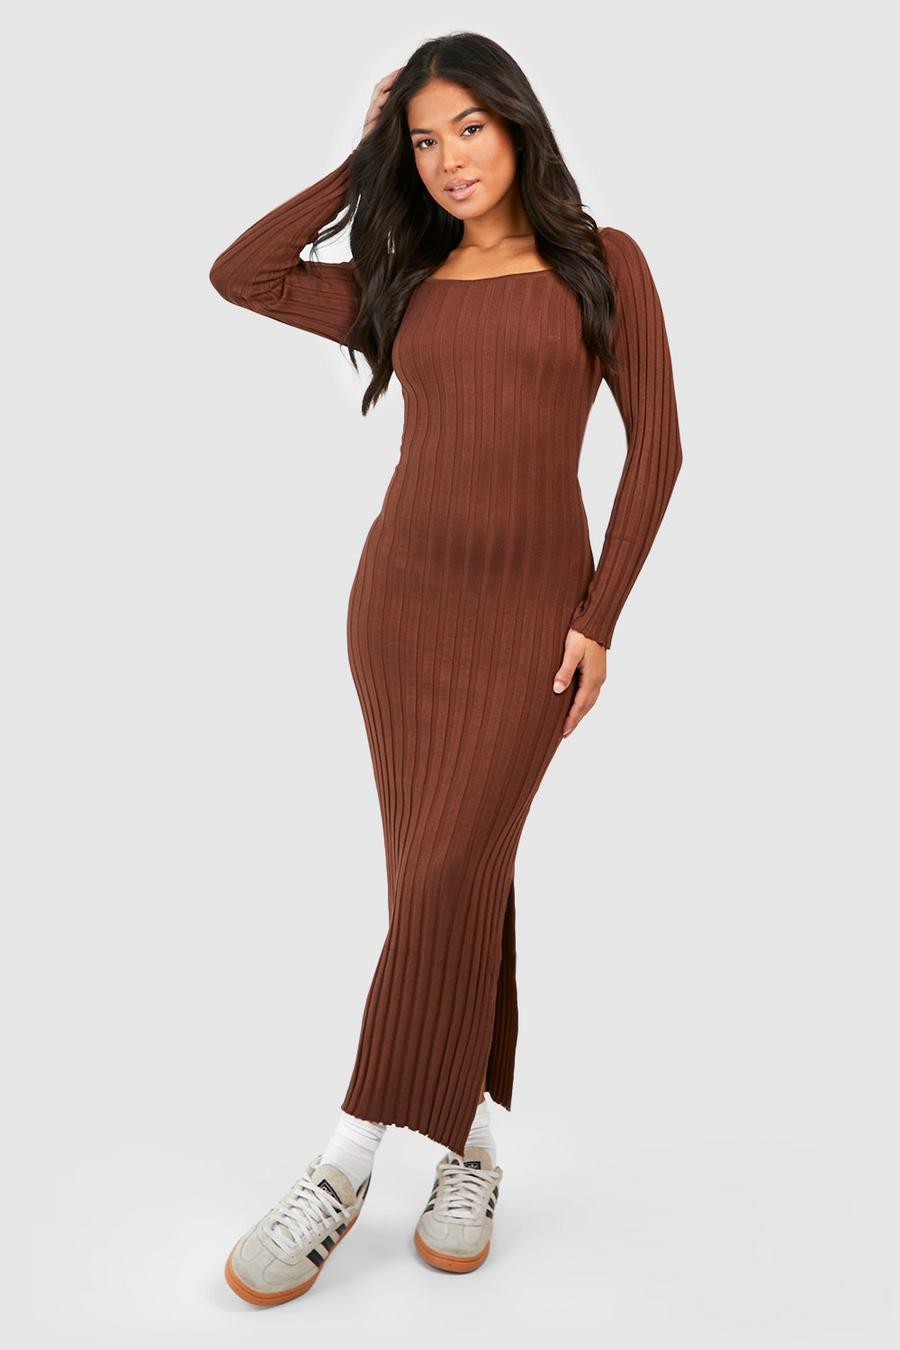 Chocolate Petite Off The Shoulder Rib Knit Maxi Dress  image number 1